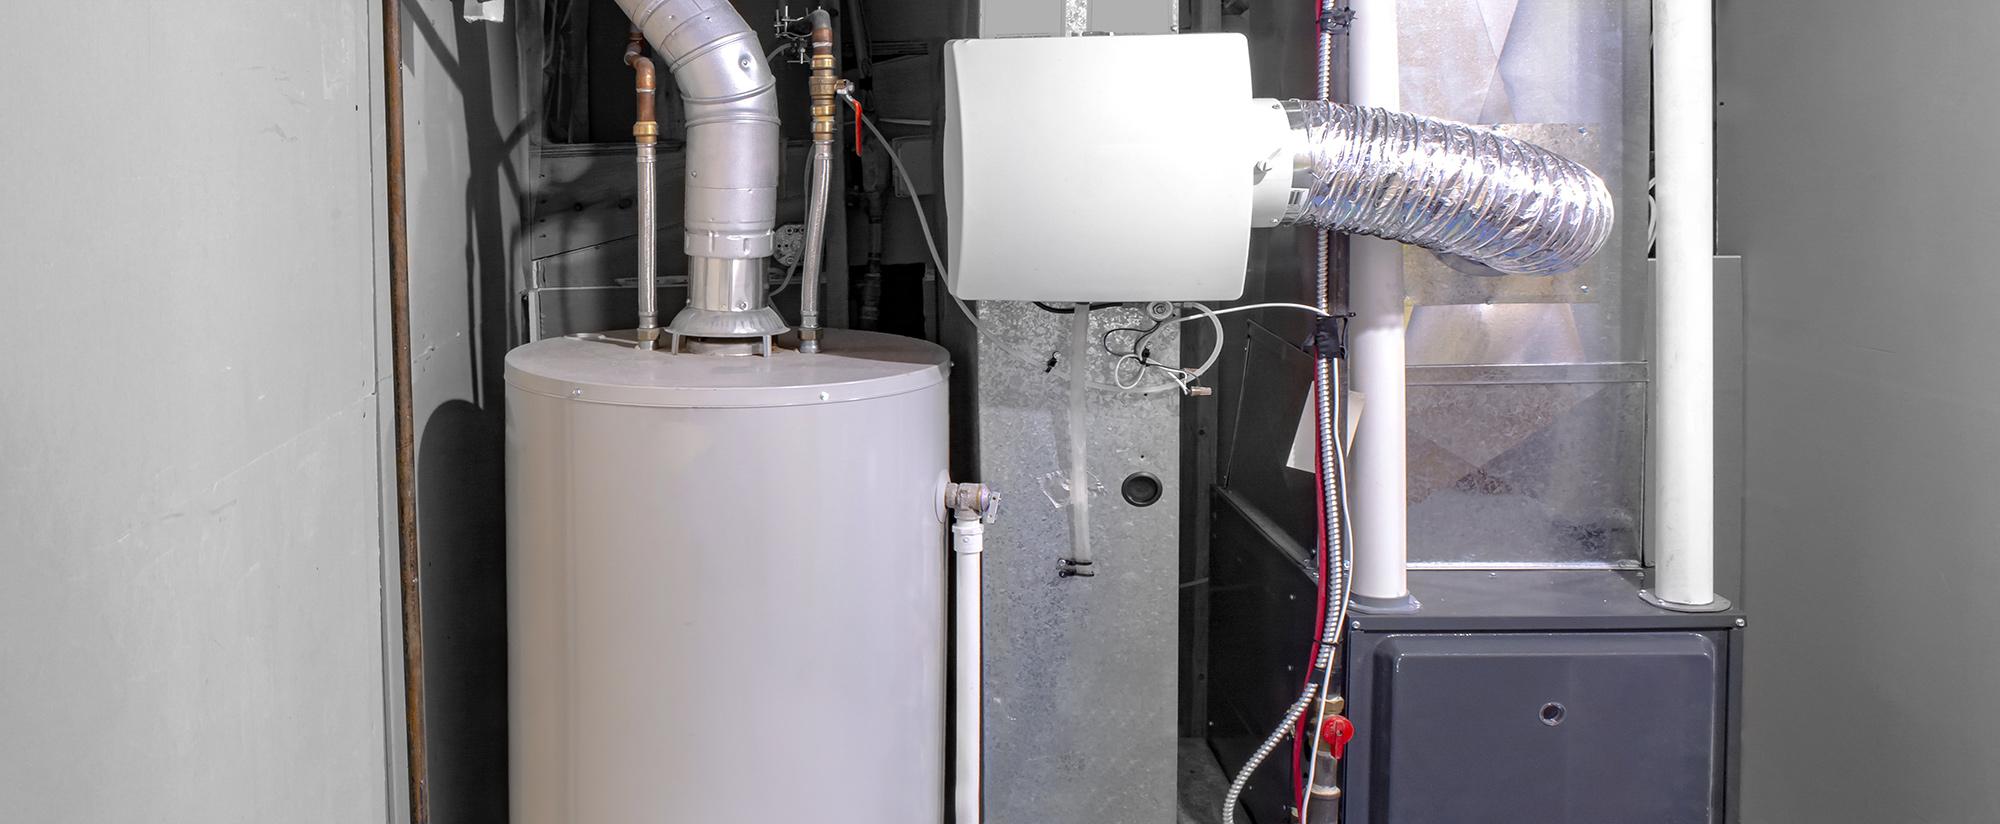 How To Install Furnace Humidifier